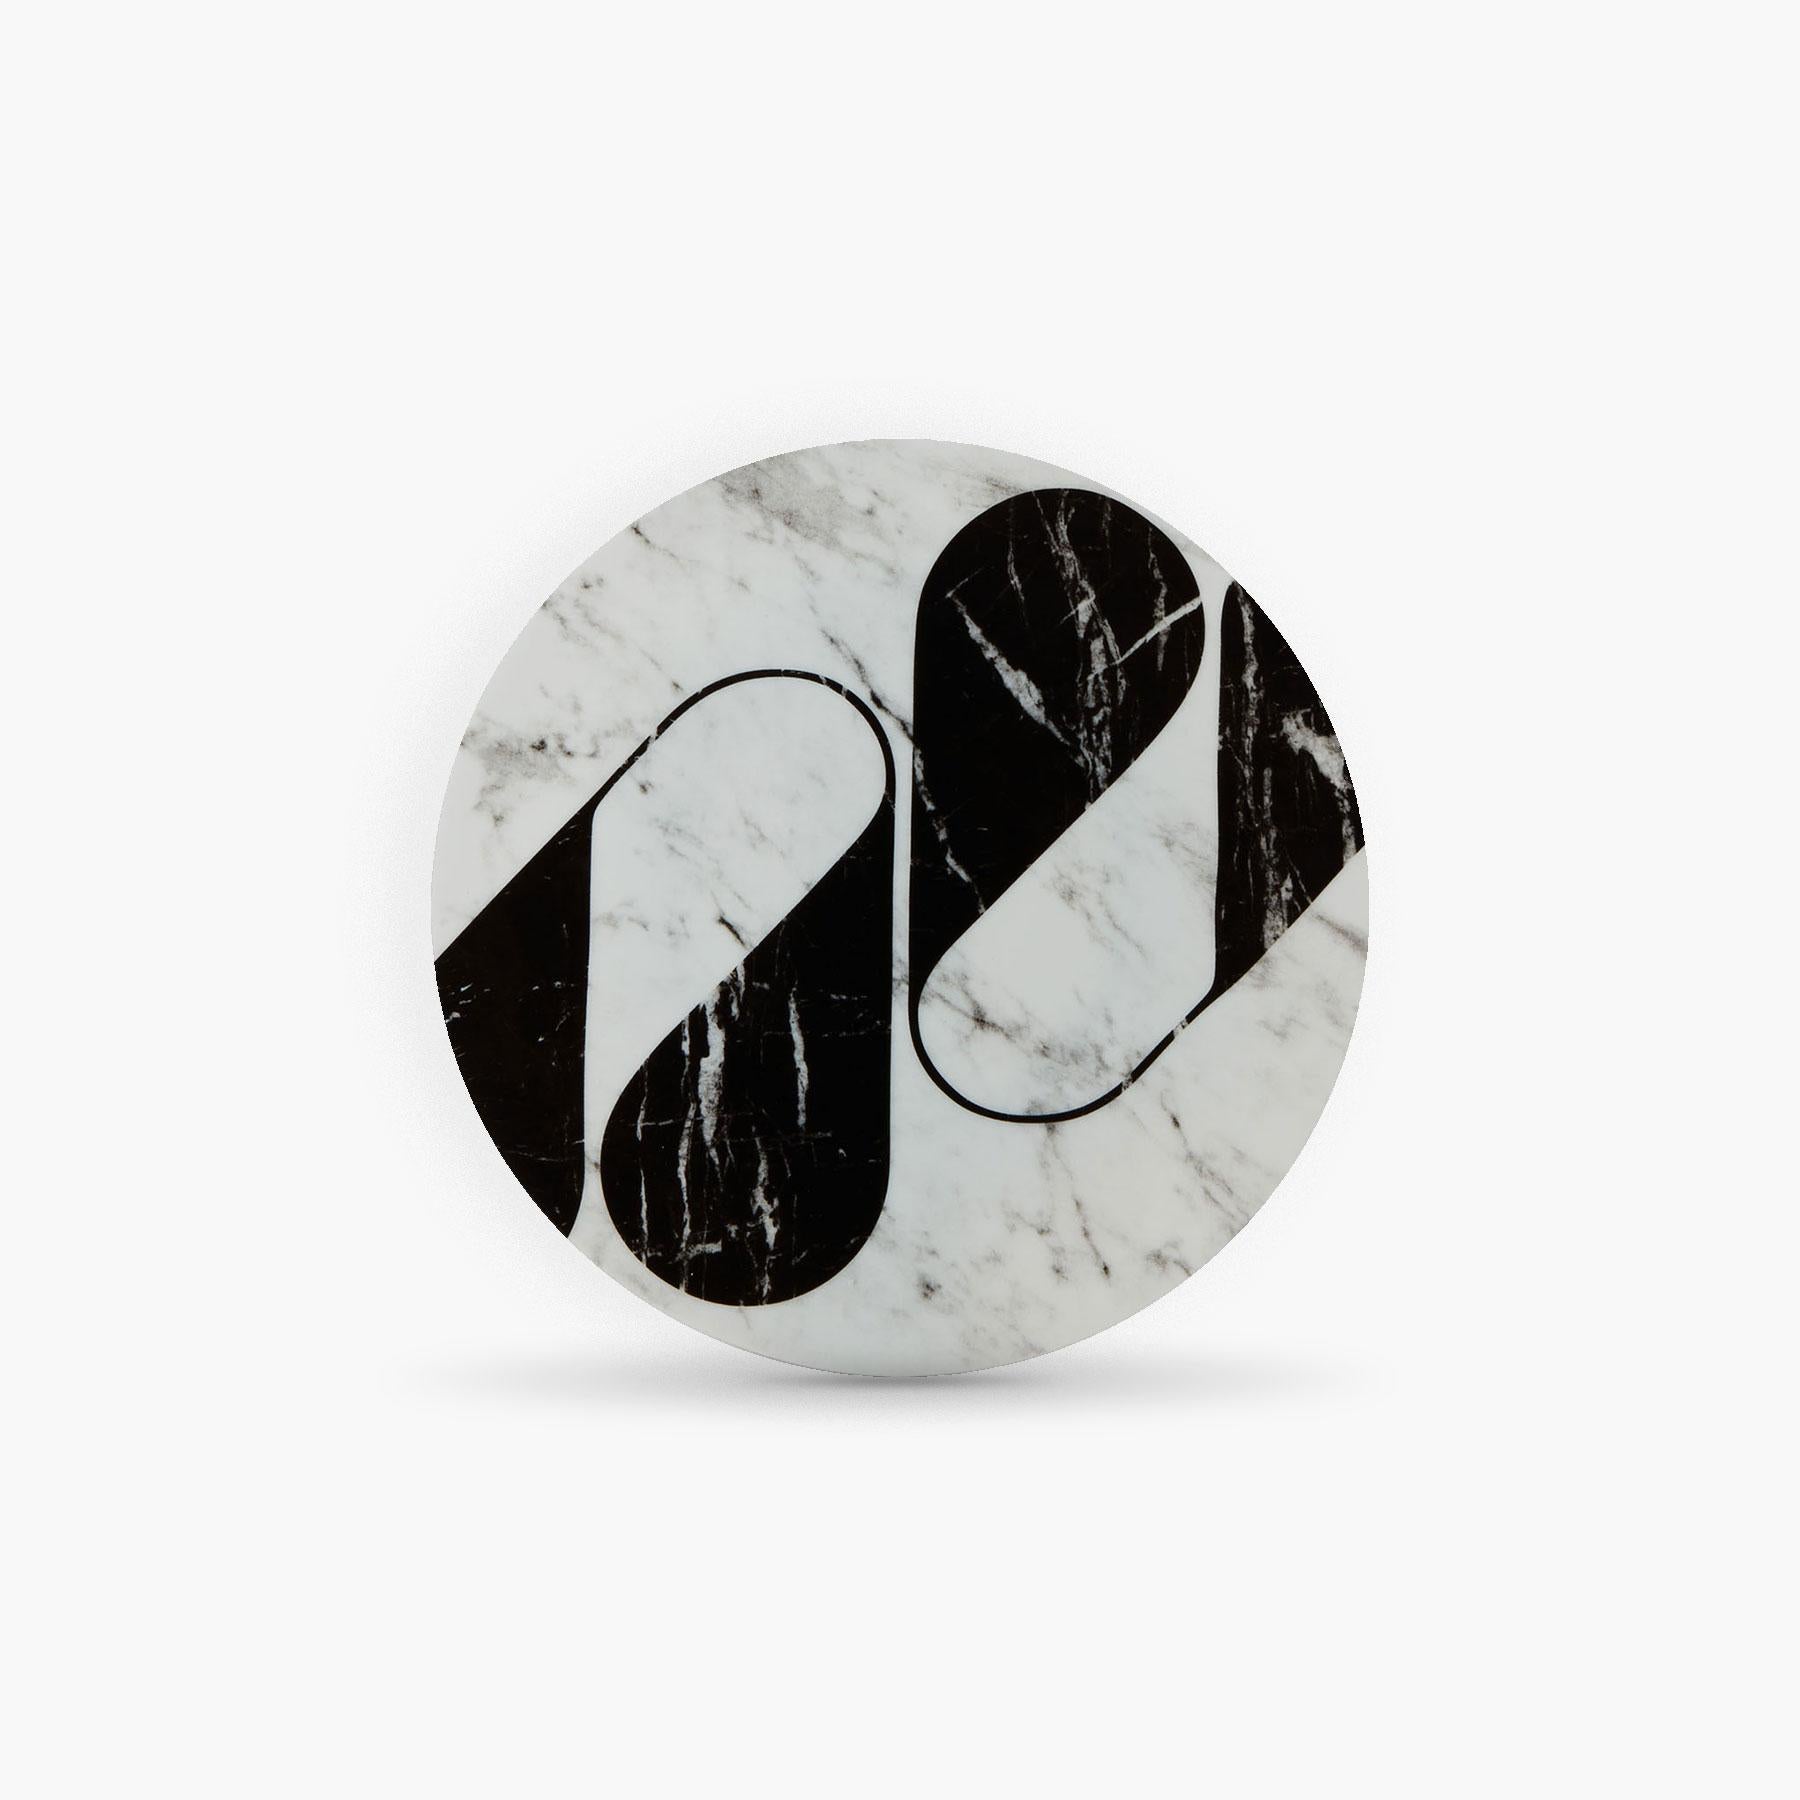 Etienne Bardelli, plastic artist, interprets in his own way the architecture of Rue de Paradis: a sweet mix between the 1930s and the 1970s.

Porcelaine of Limoges extra-fine. 
Black and white serigraphy.
Diameter: 21 cm 
Height: 1.4 cm
Weight: